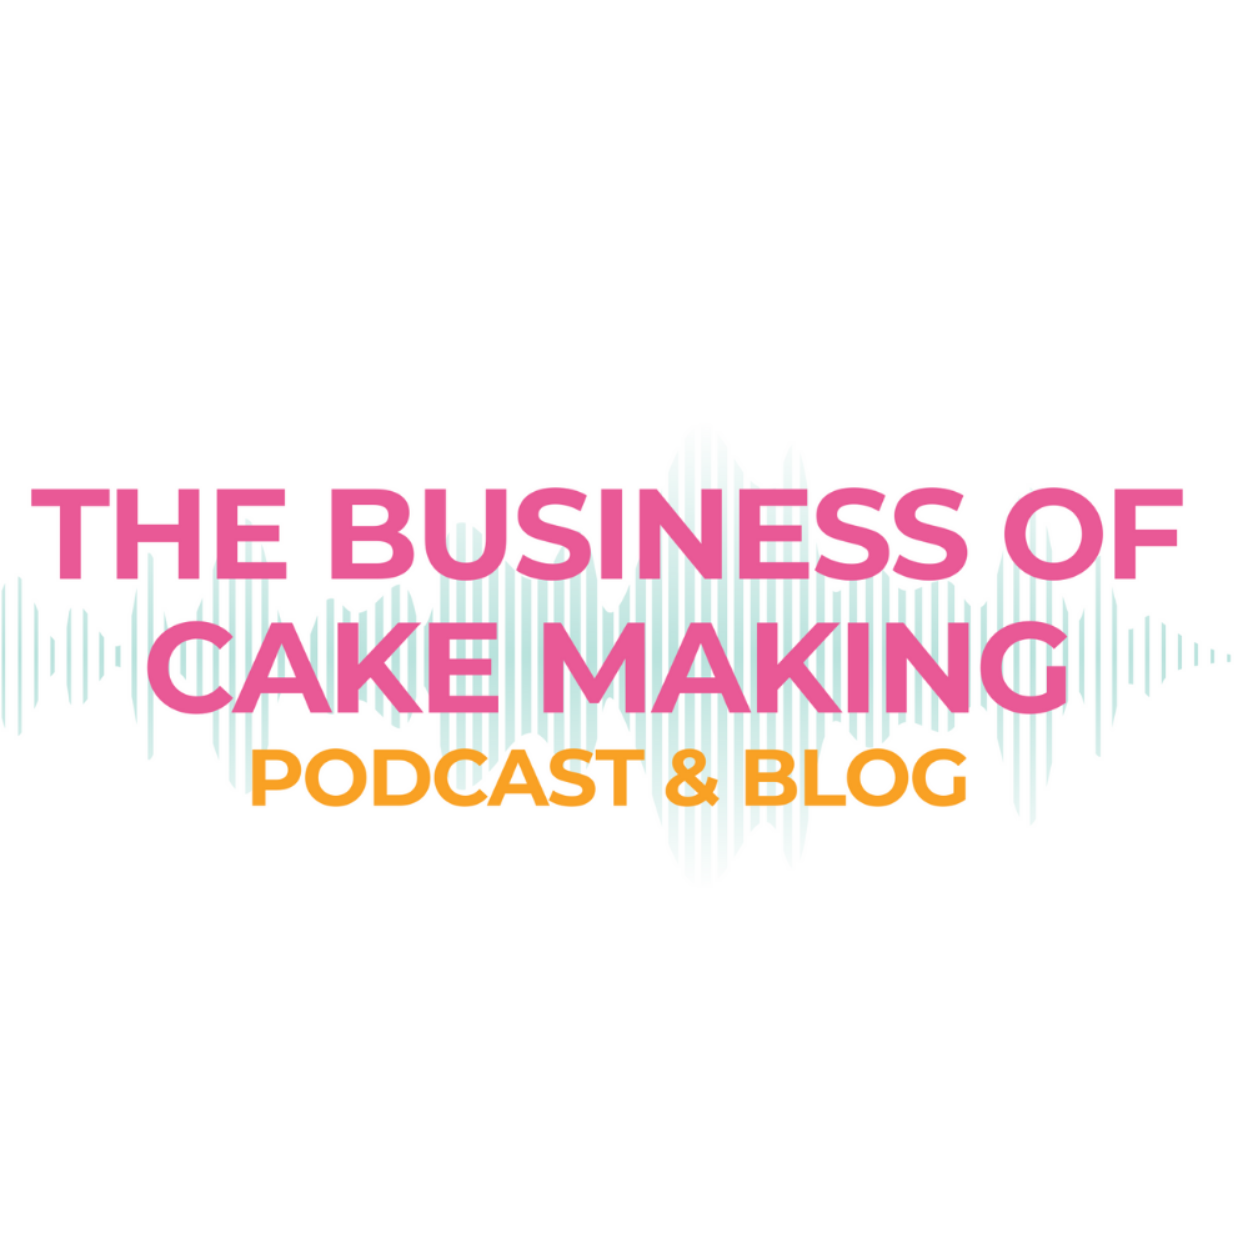 The Business of Cake Making Podcast